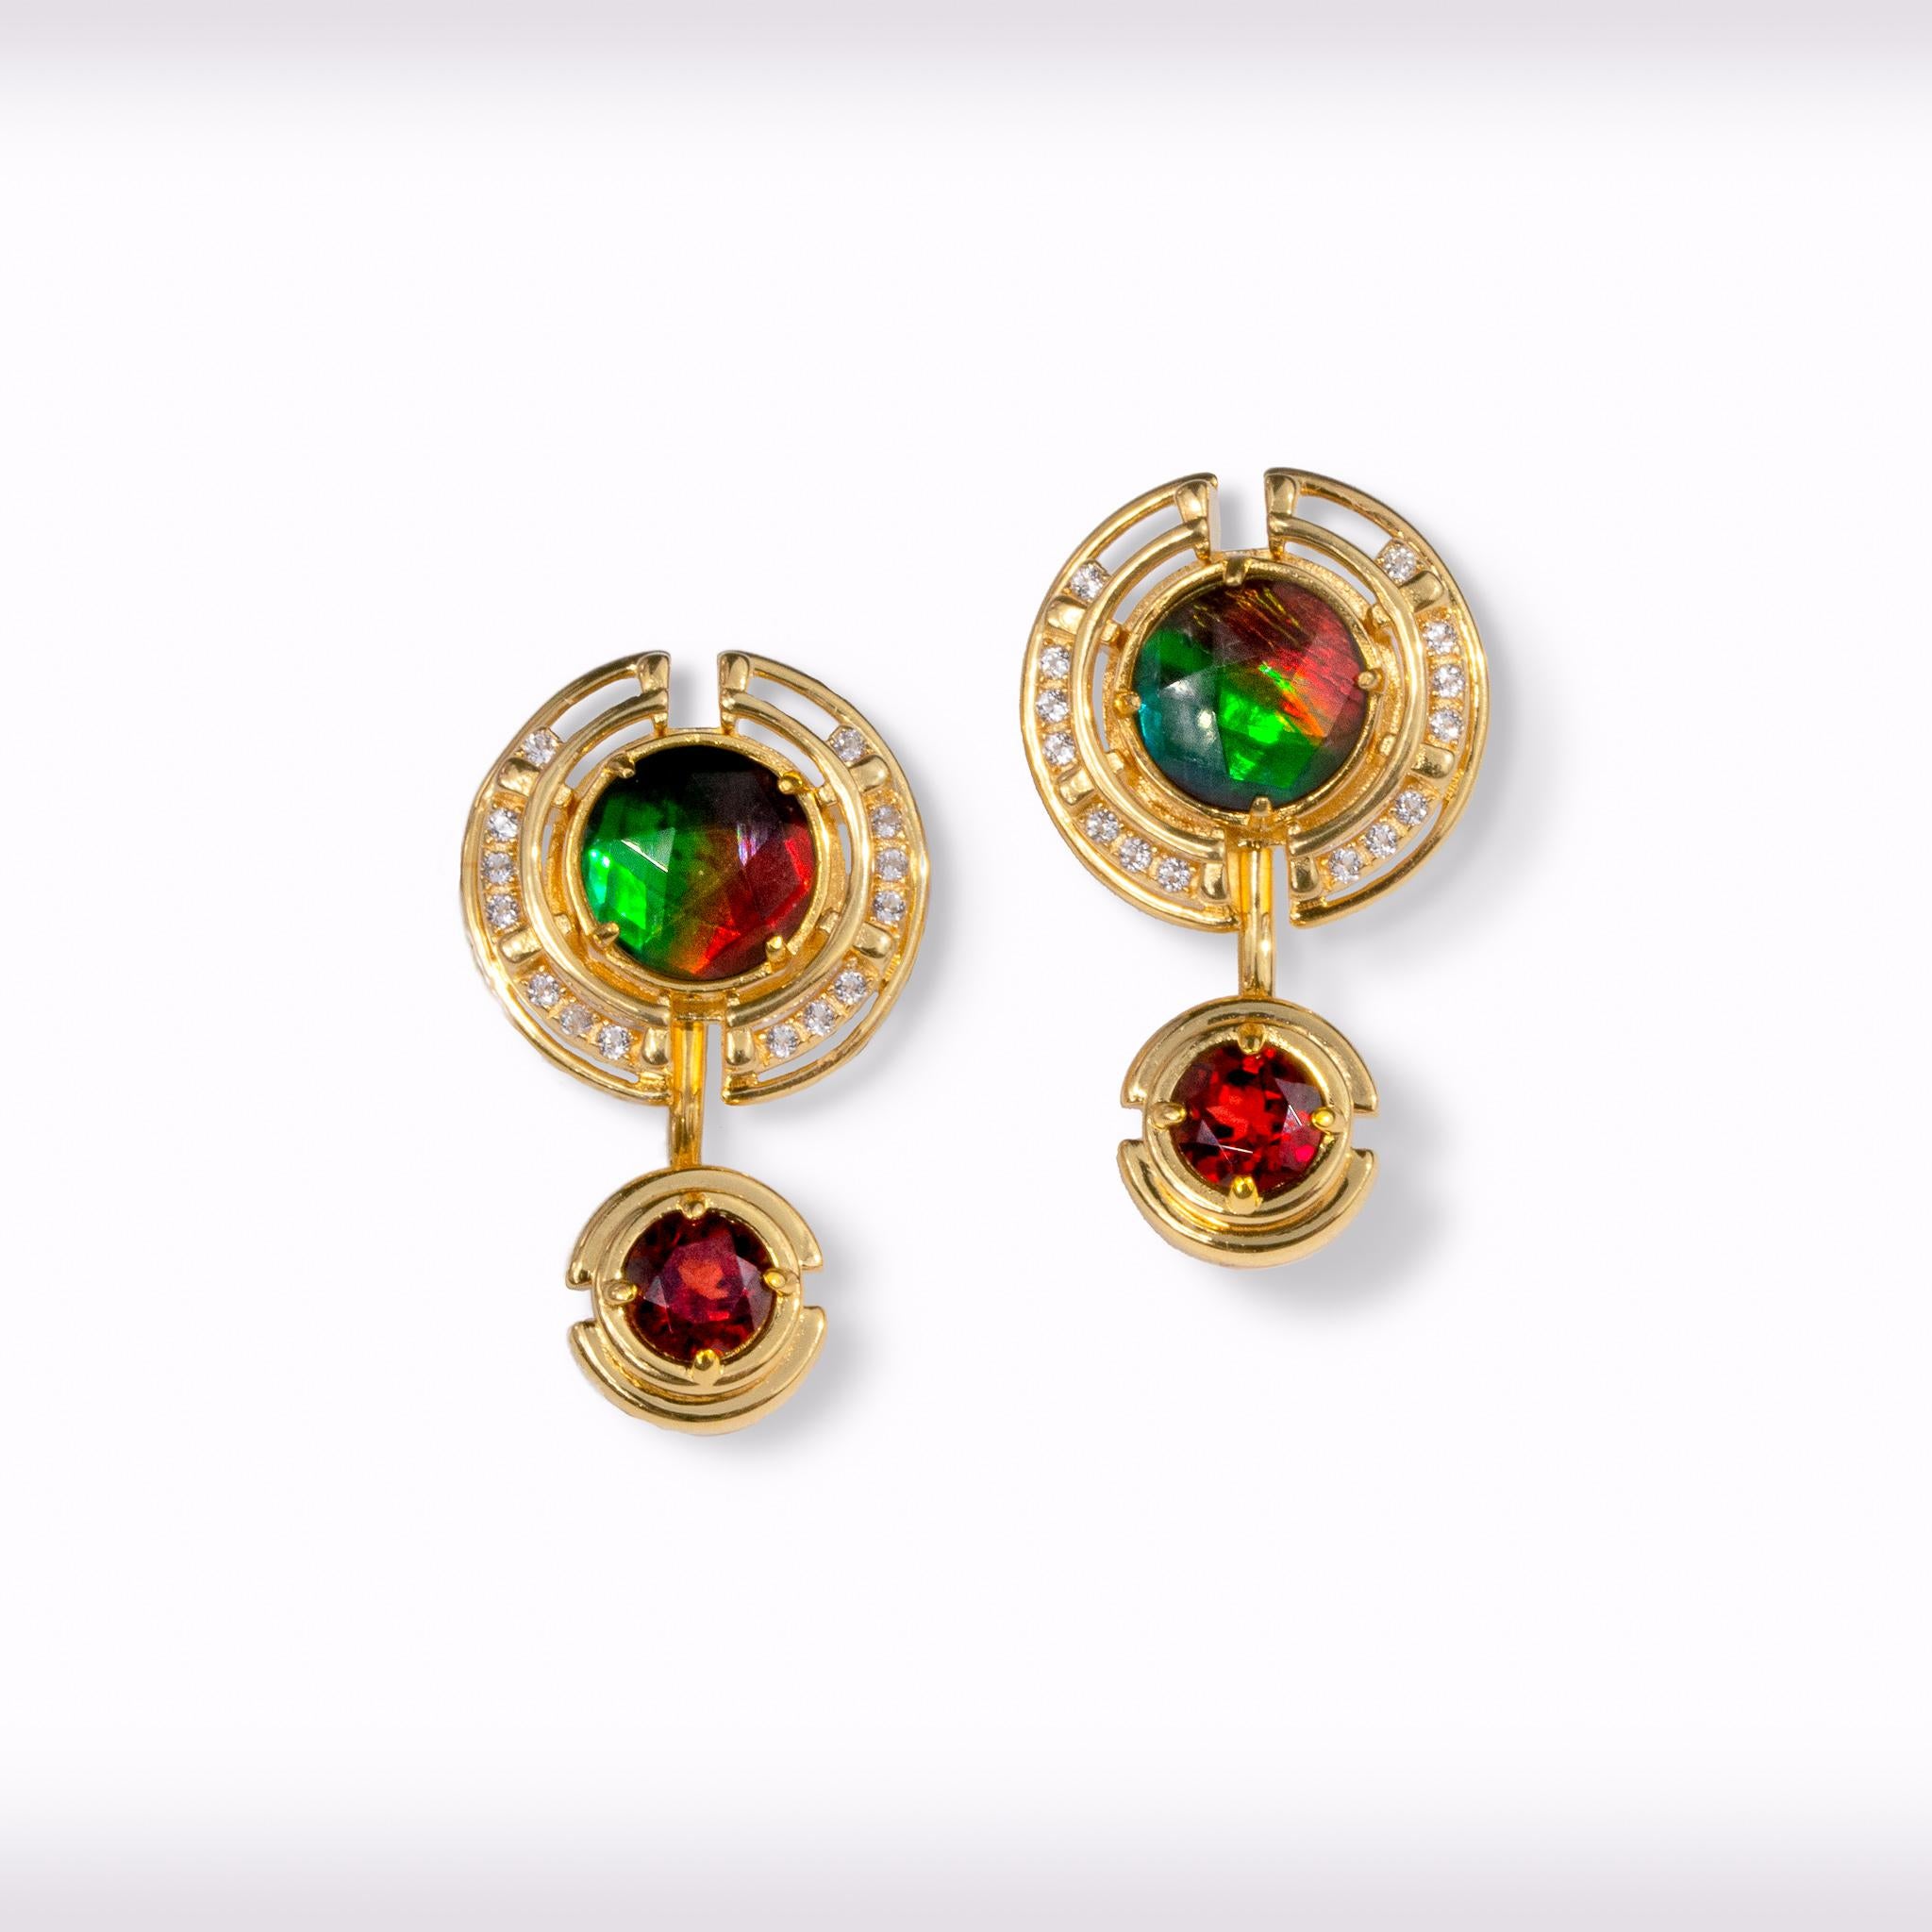 Product Details:

The Prosperity Collection celebrating the Chinese new year was inspired by the Chinese symbol for prosperity, bringing good fortune to all who wear it.

Faceted A grade Ammolite
10mm Round Ammolite Earrings
18K gold